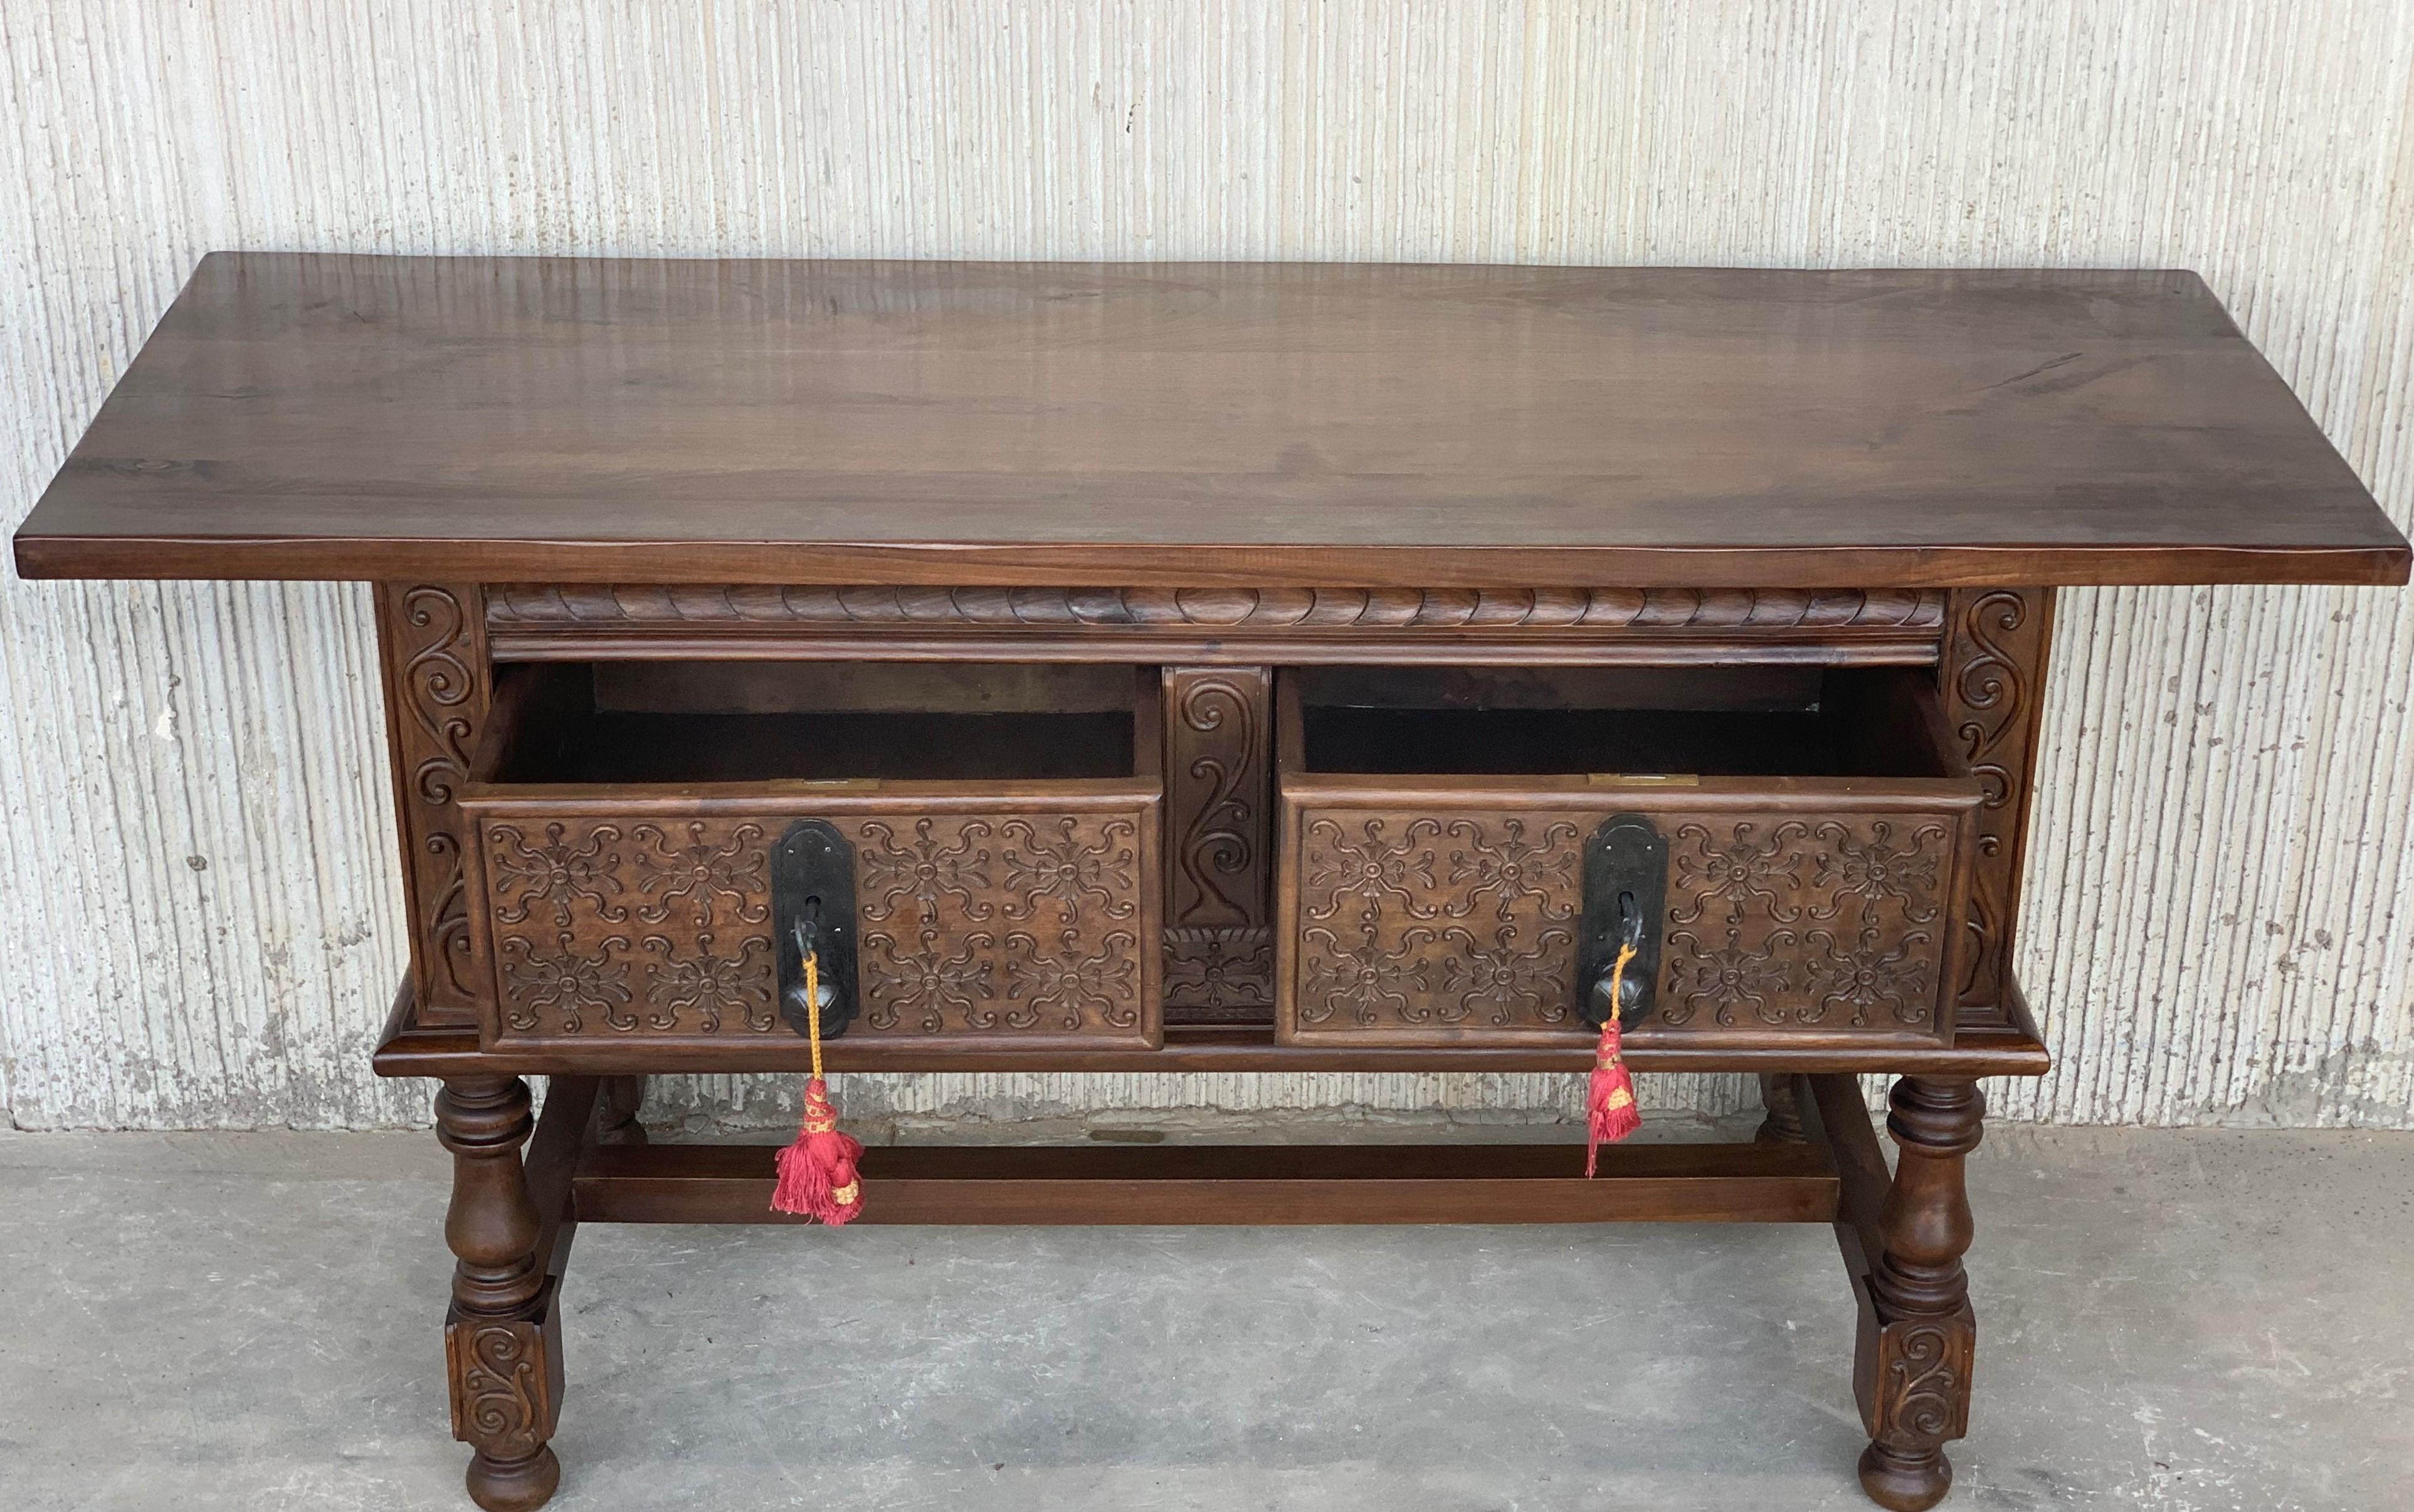 Iron Spanish Console Chest Table with Two Carved Drawers and Original Hardware